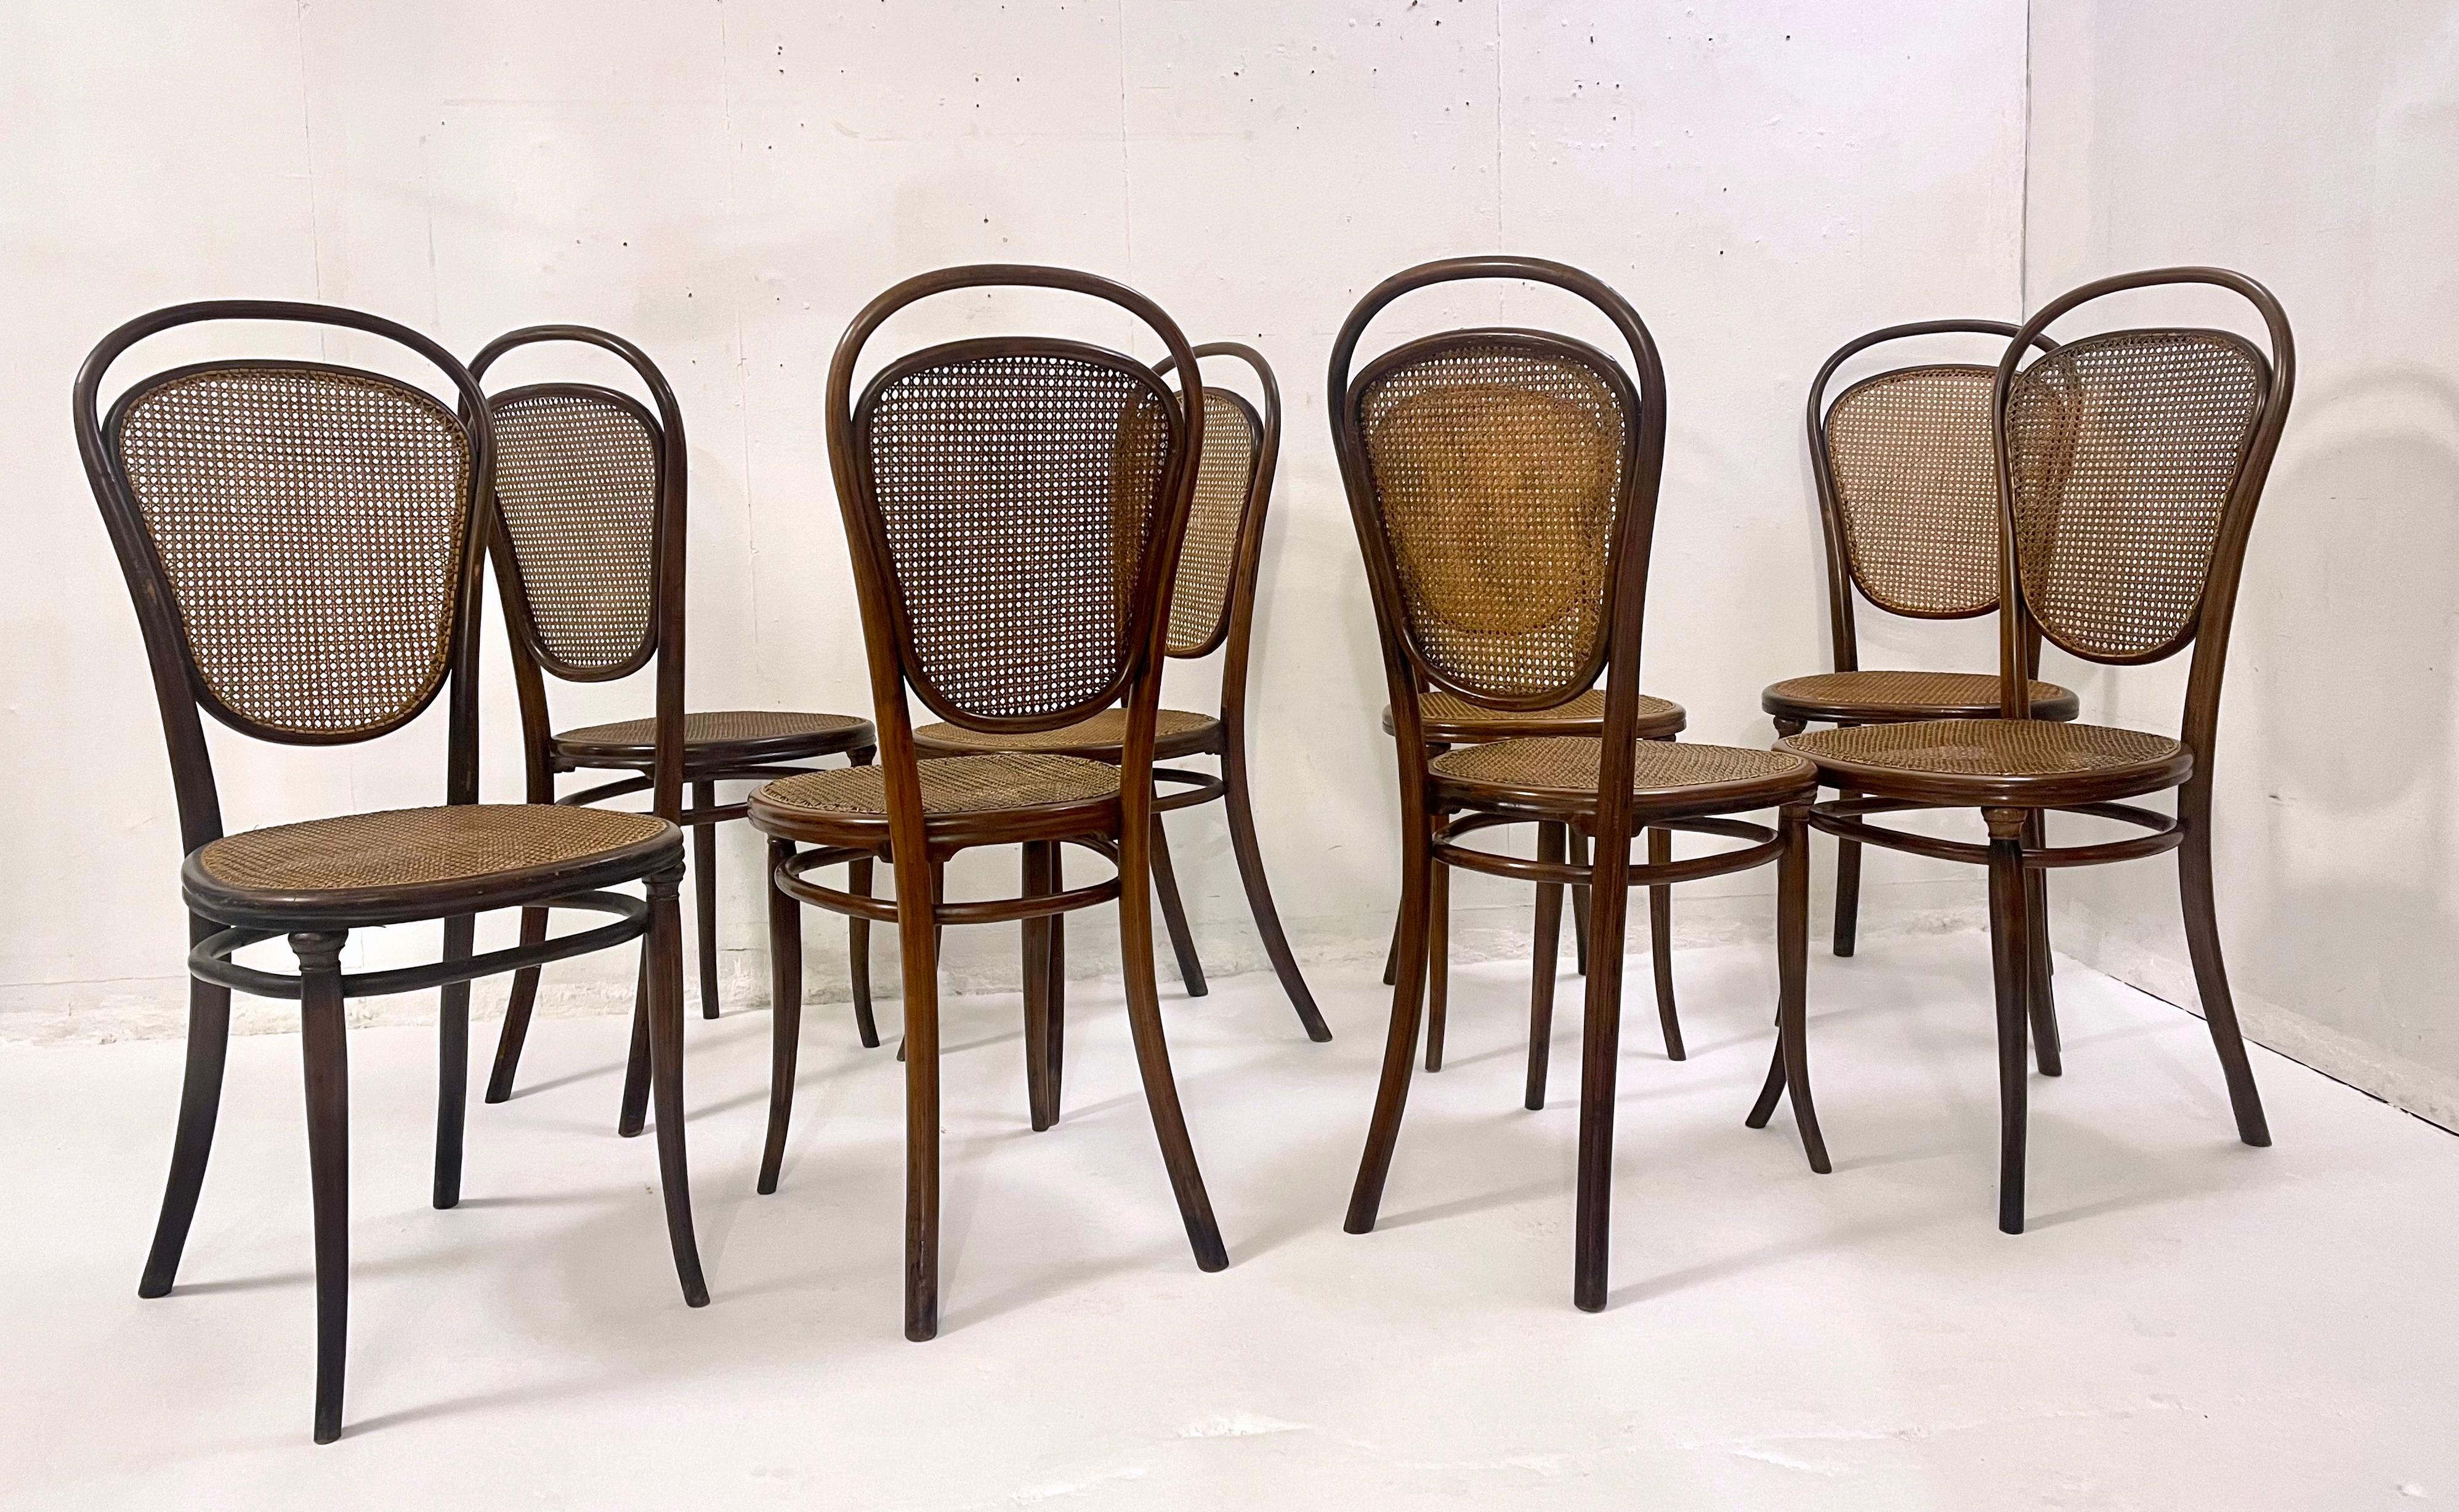 caning furniture